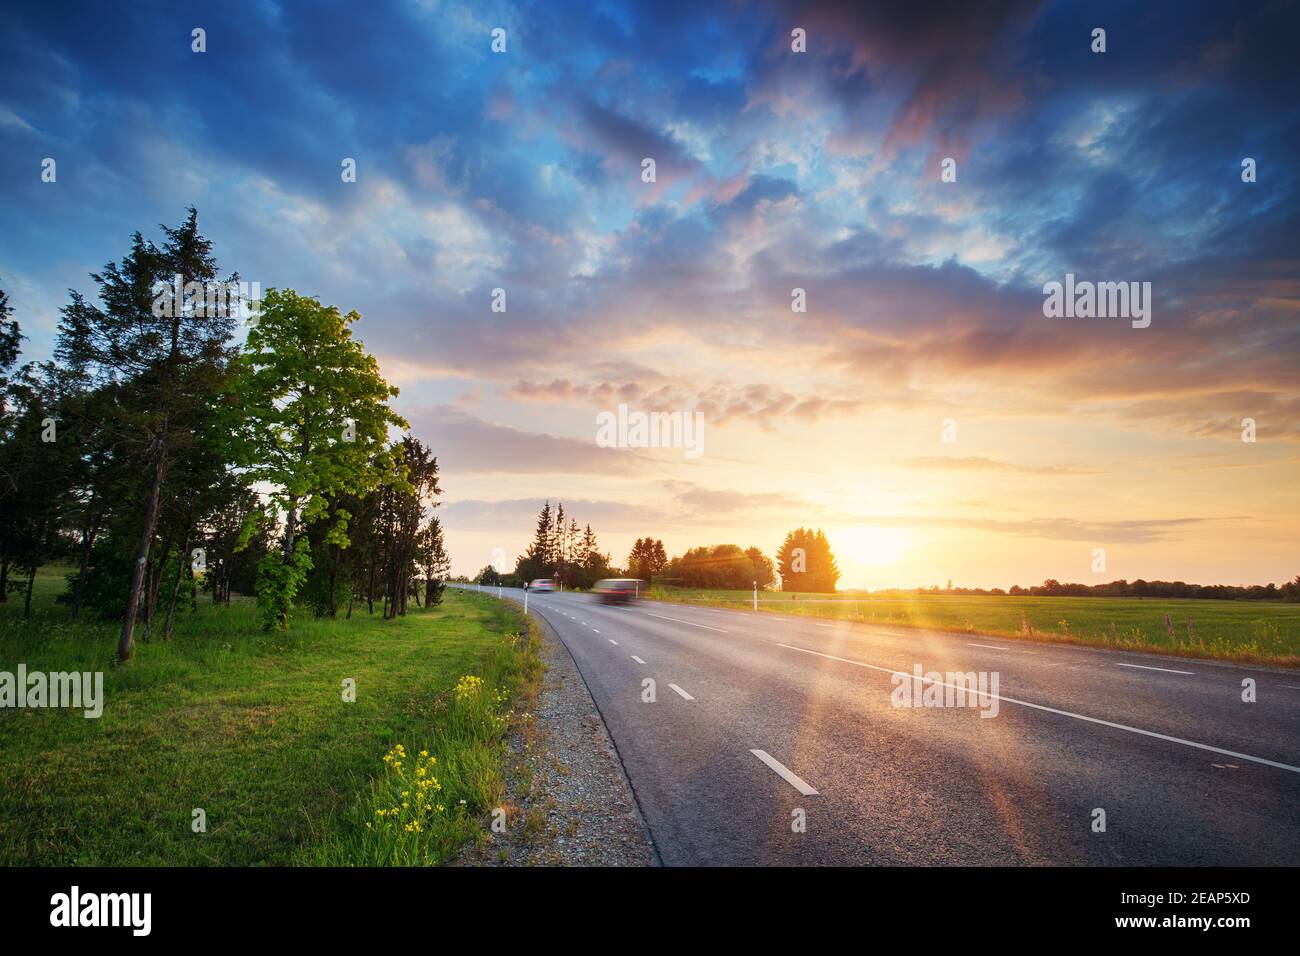 Asphalt road and dividing lines at sunset Stock Photo